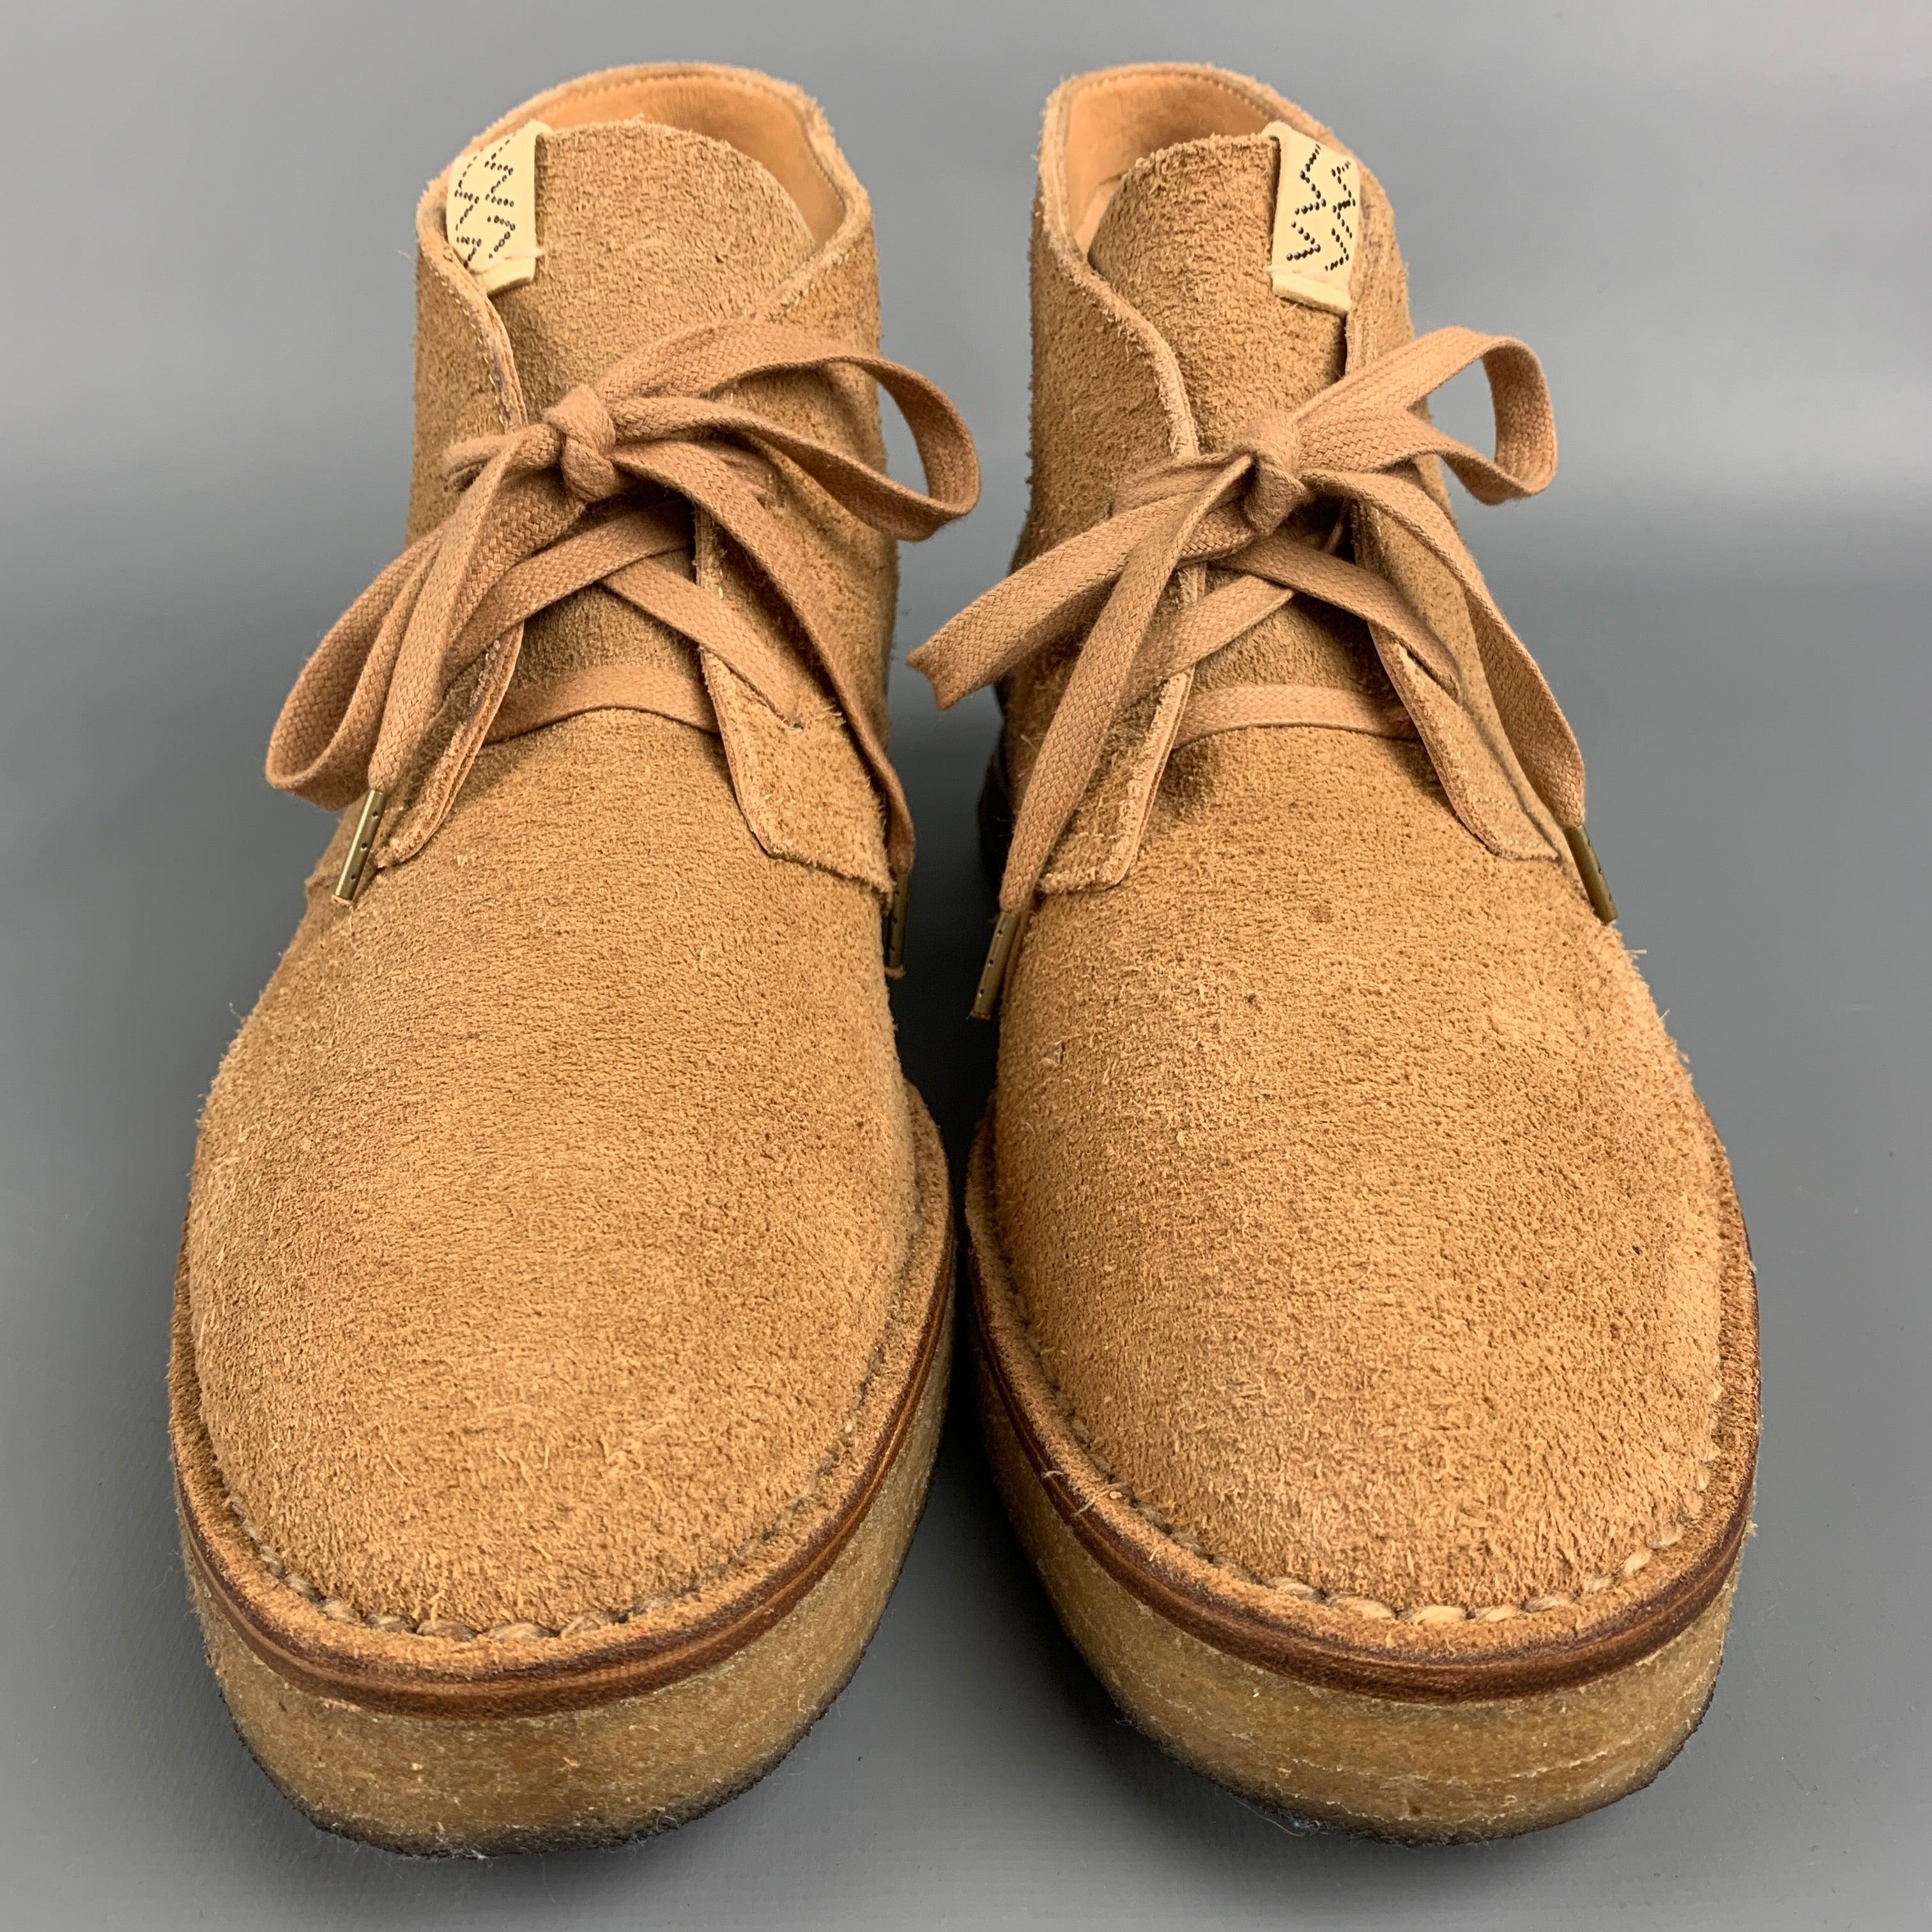 Men's VISVIM Size 9 Sand Textured Leather Lace Up ISDT BOOTS-FOLK For Sale